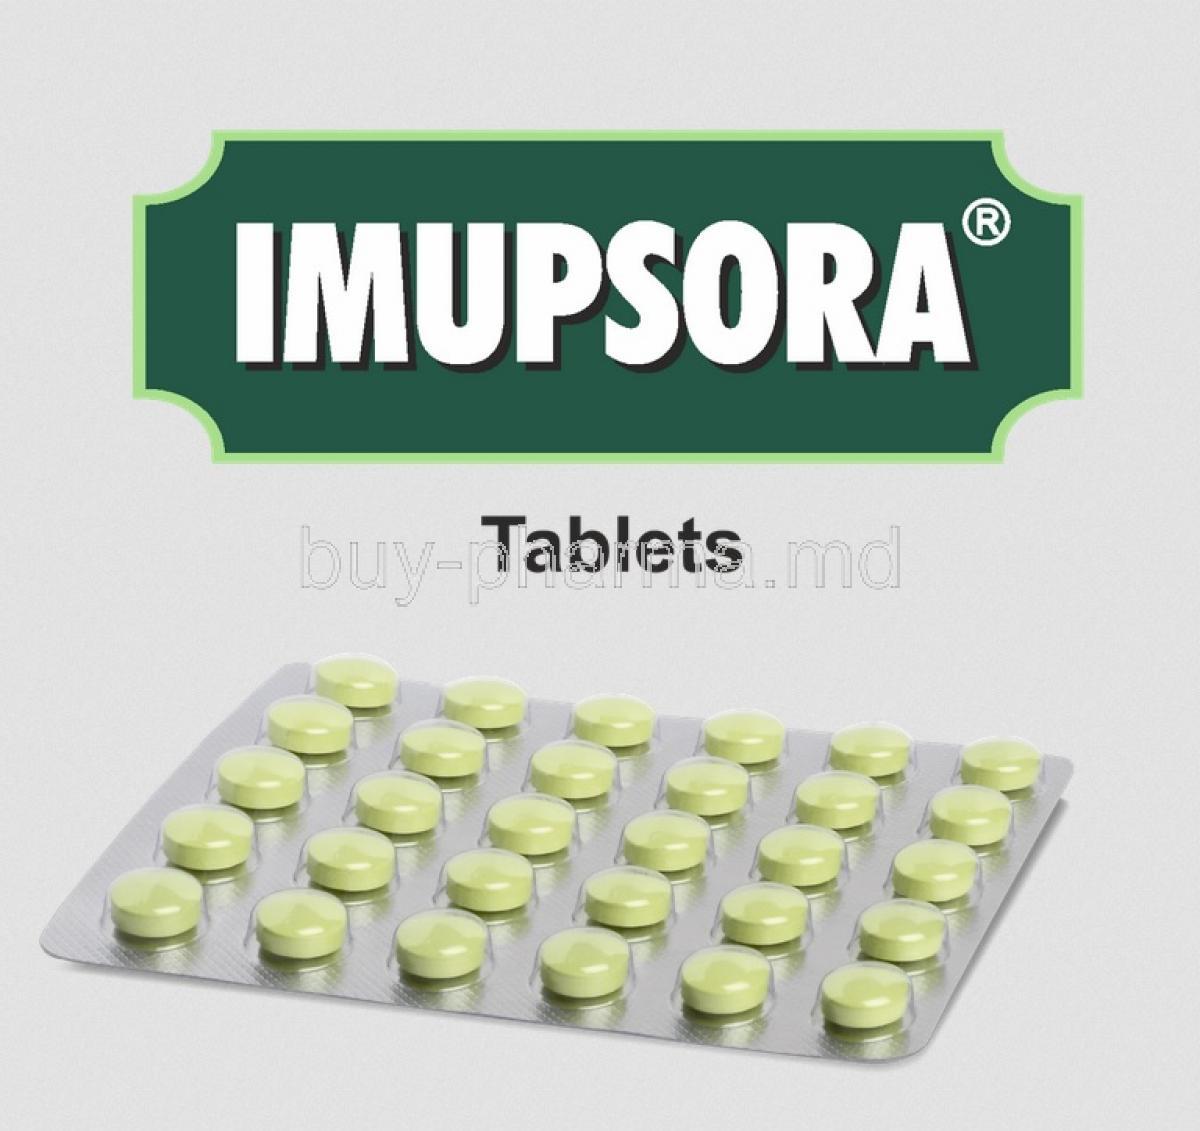 Imupsora box and tablets